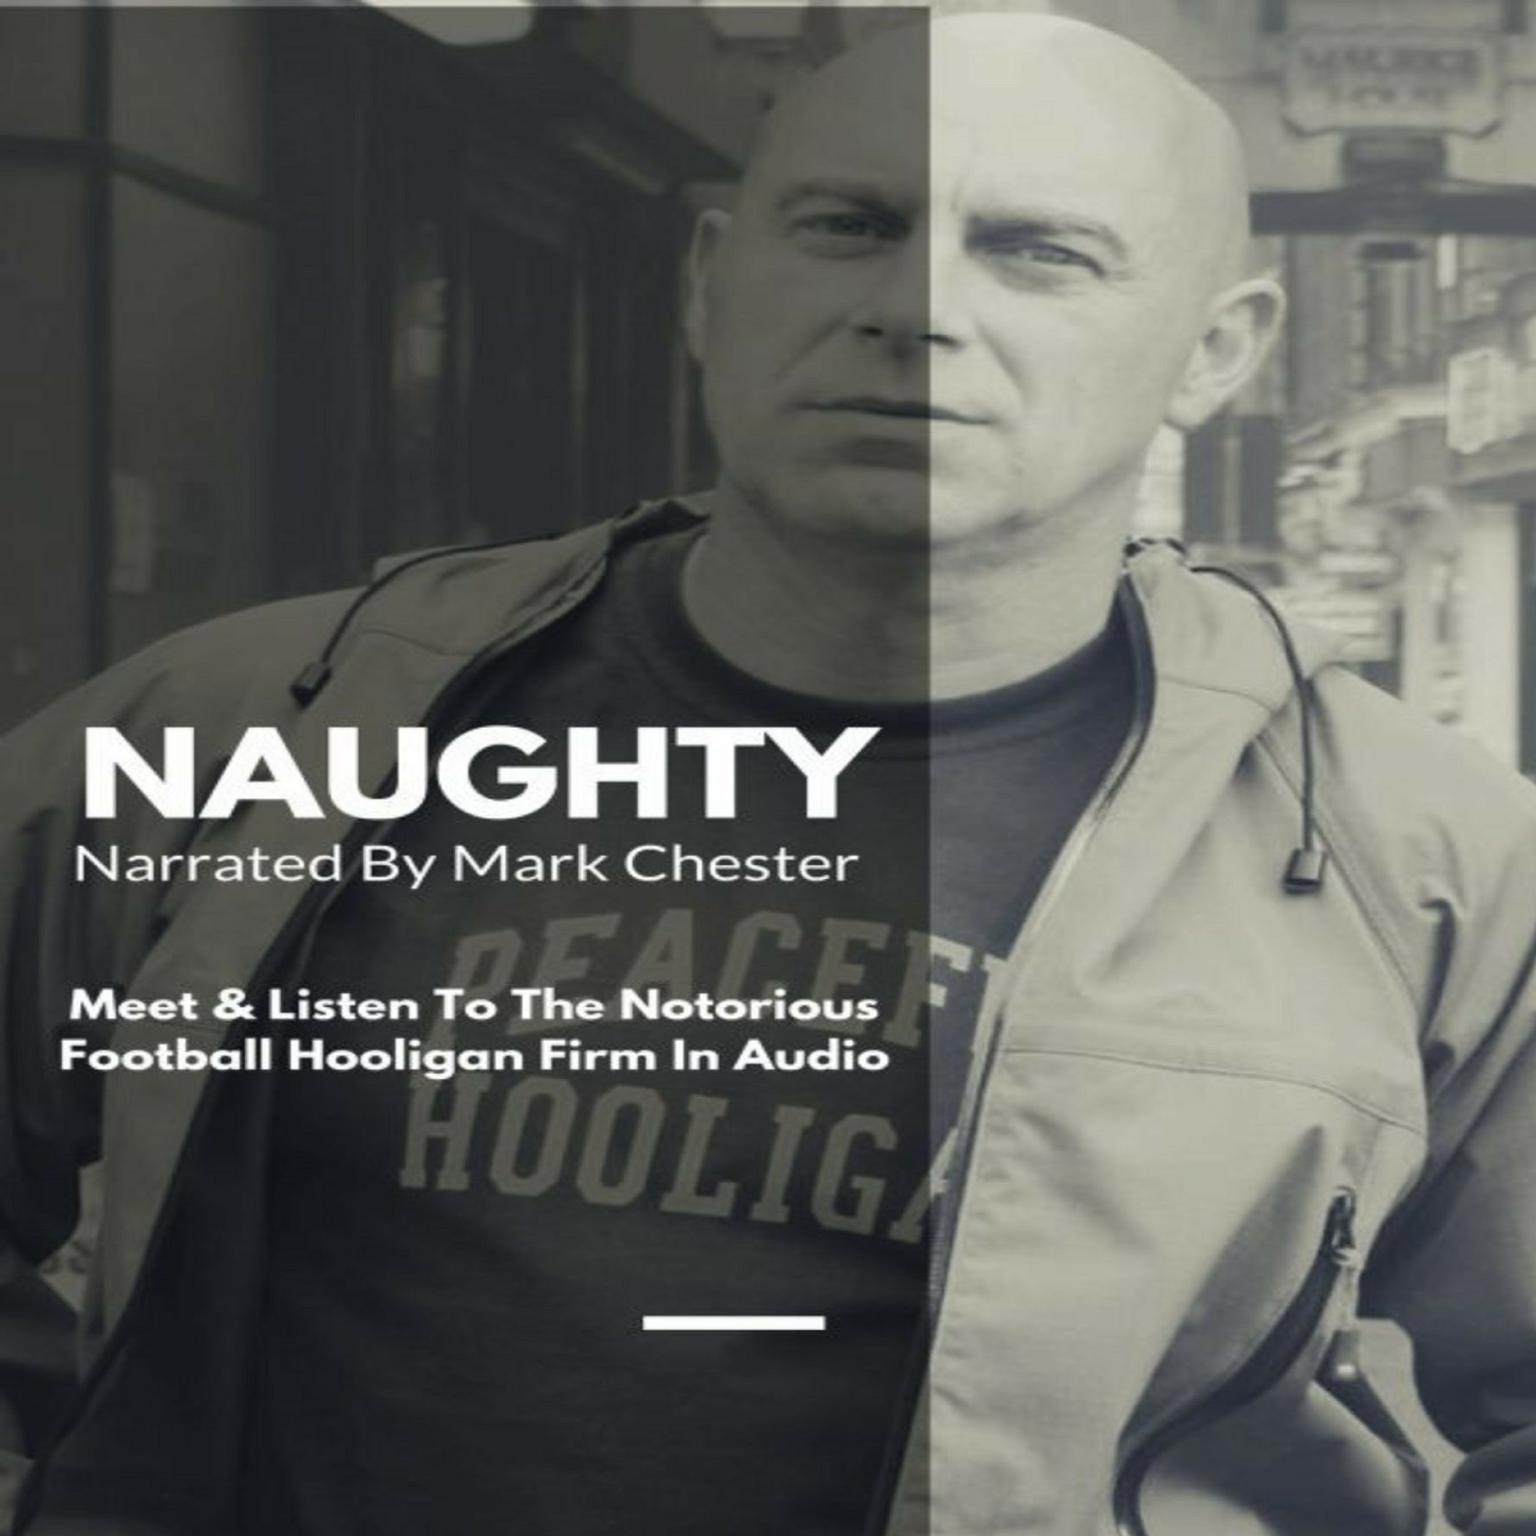 Naughty: The Story of a Football Hooligan Gang Audiobook, by Mark Chester